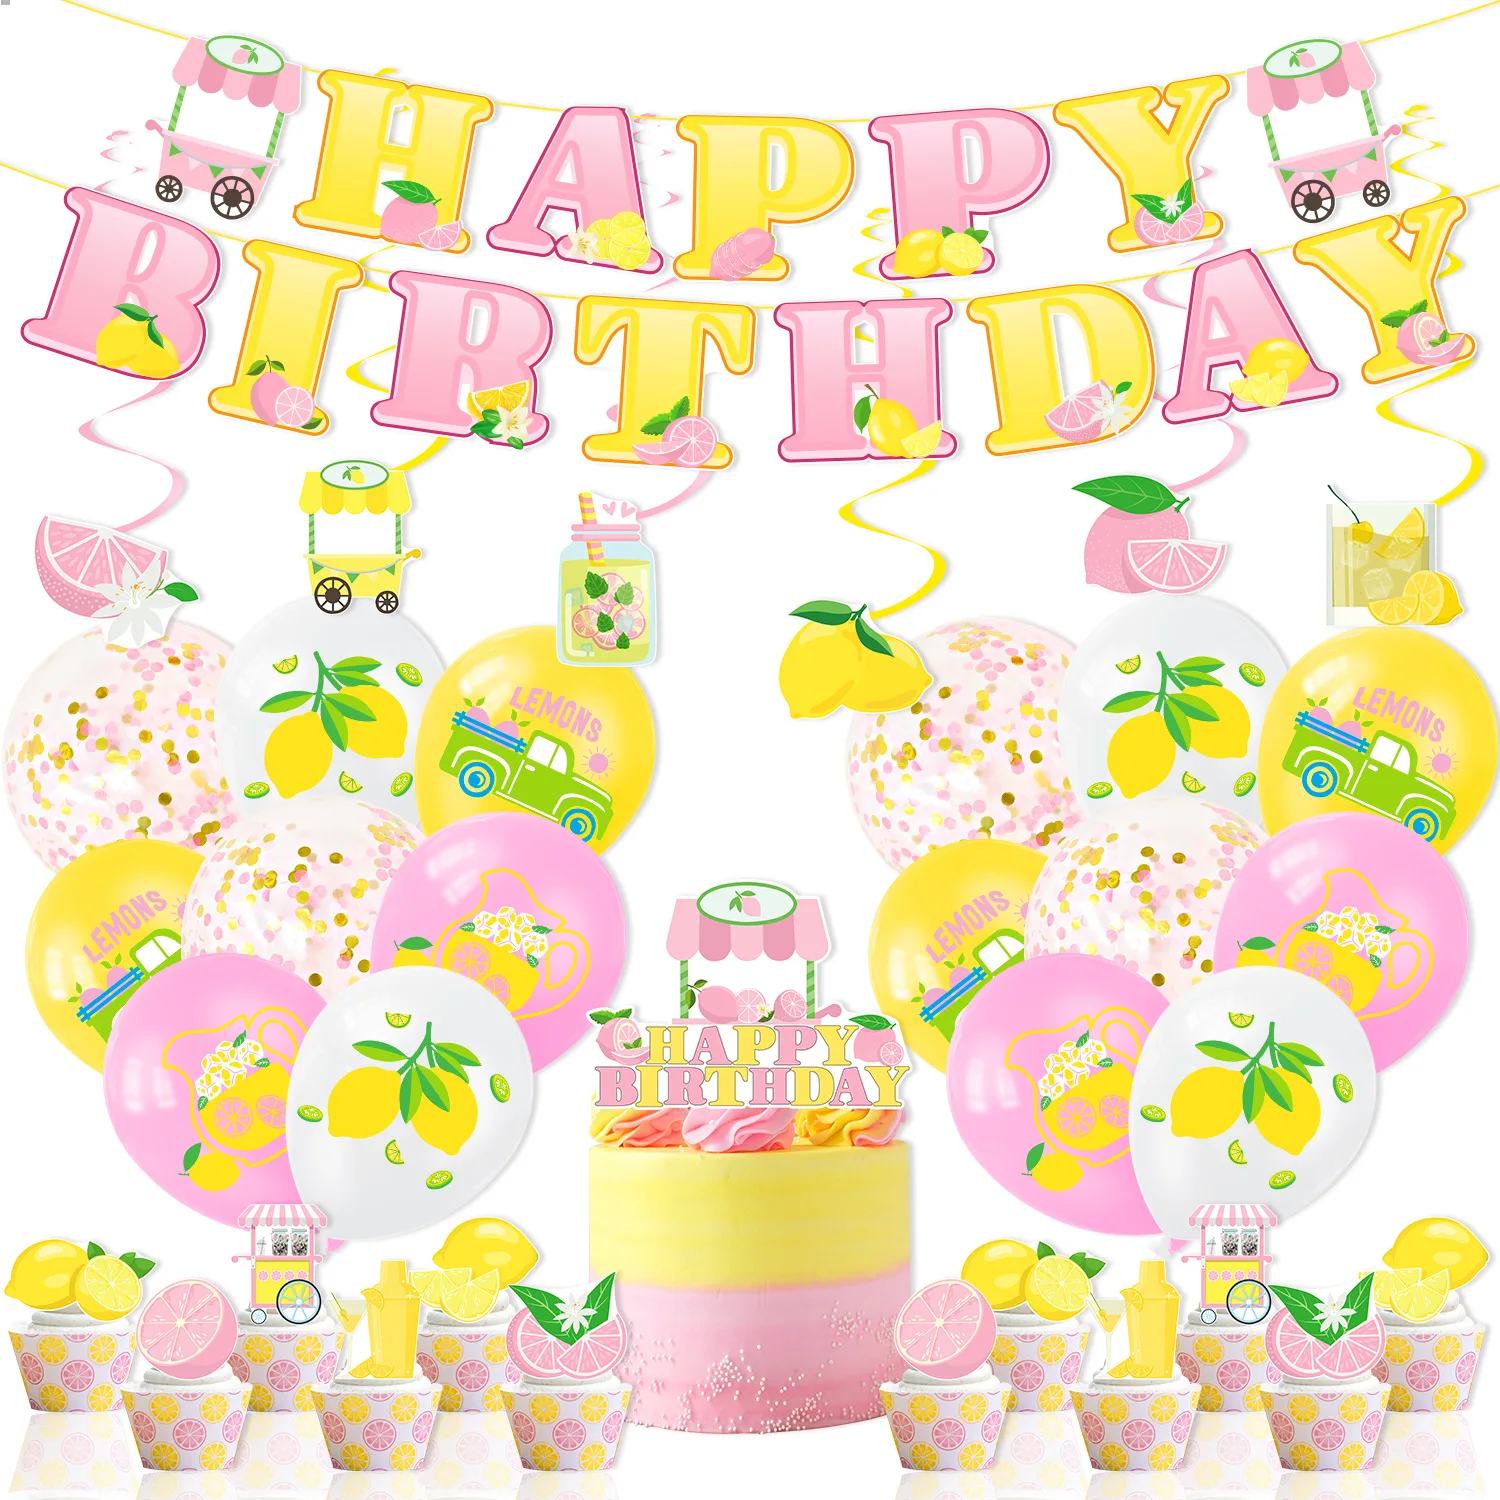 

Sursurprise-Lemon Themed Birthday Party Decorations for Girls, Lemon Balloons, Banner, Cake Topper Set, Fruits Party Supplies